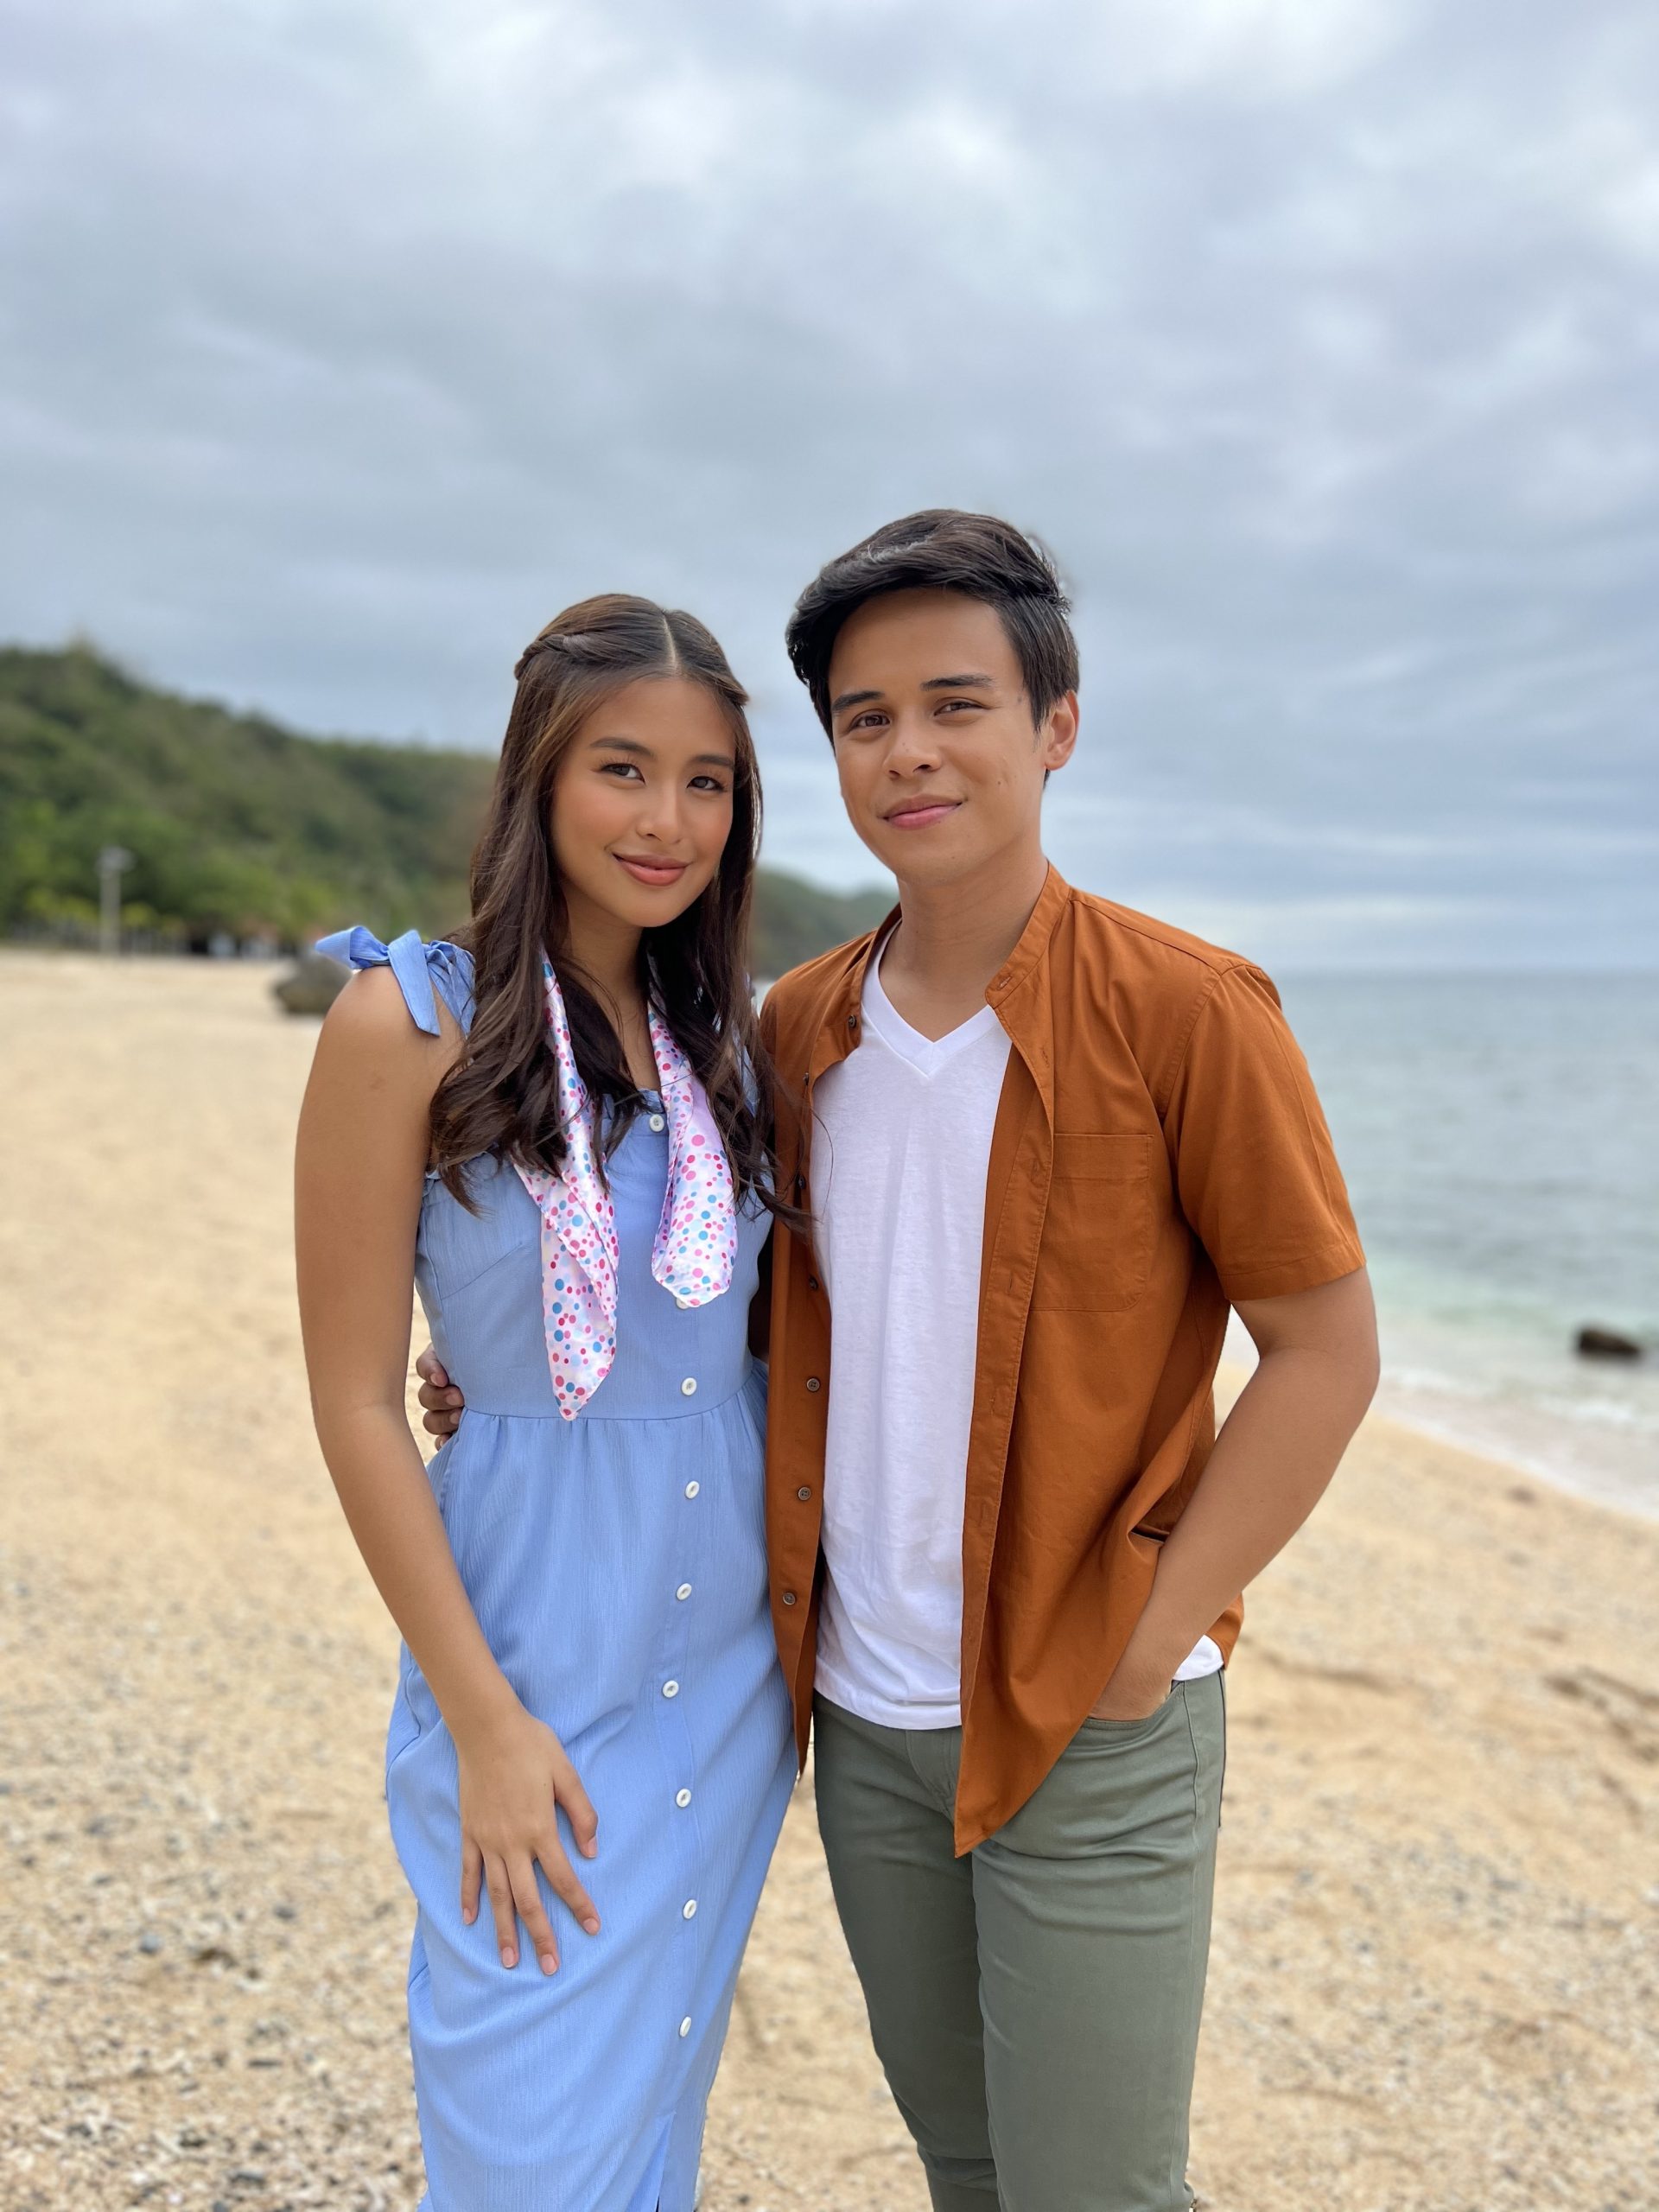 Gabbi Garcia and Khalil Ramos. Love You Stranger is their first-ever primetime TV series together.